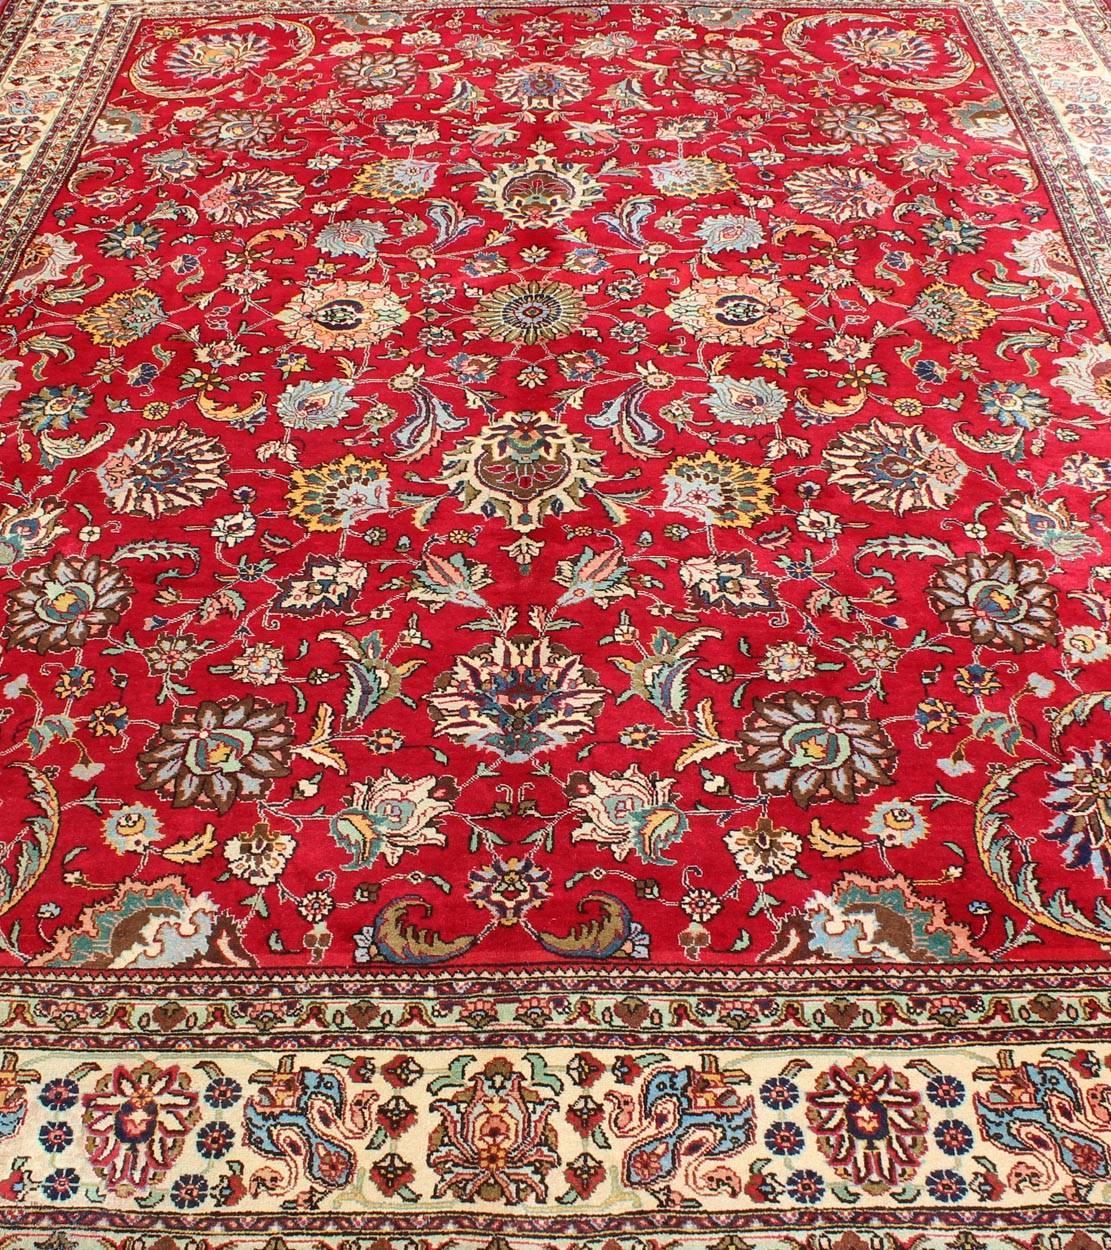 Semi Antique Persian Tabriz Rug with All-Over Blossom Design In Red and Ivory  For Sale 6